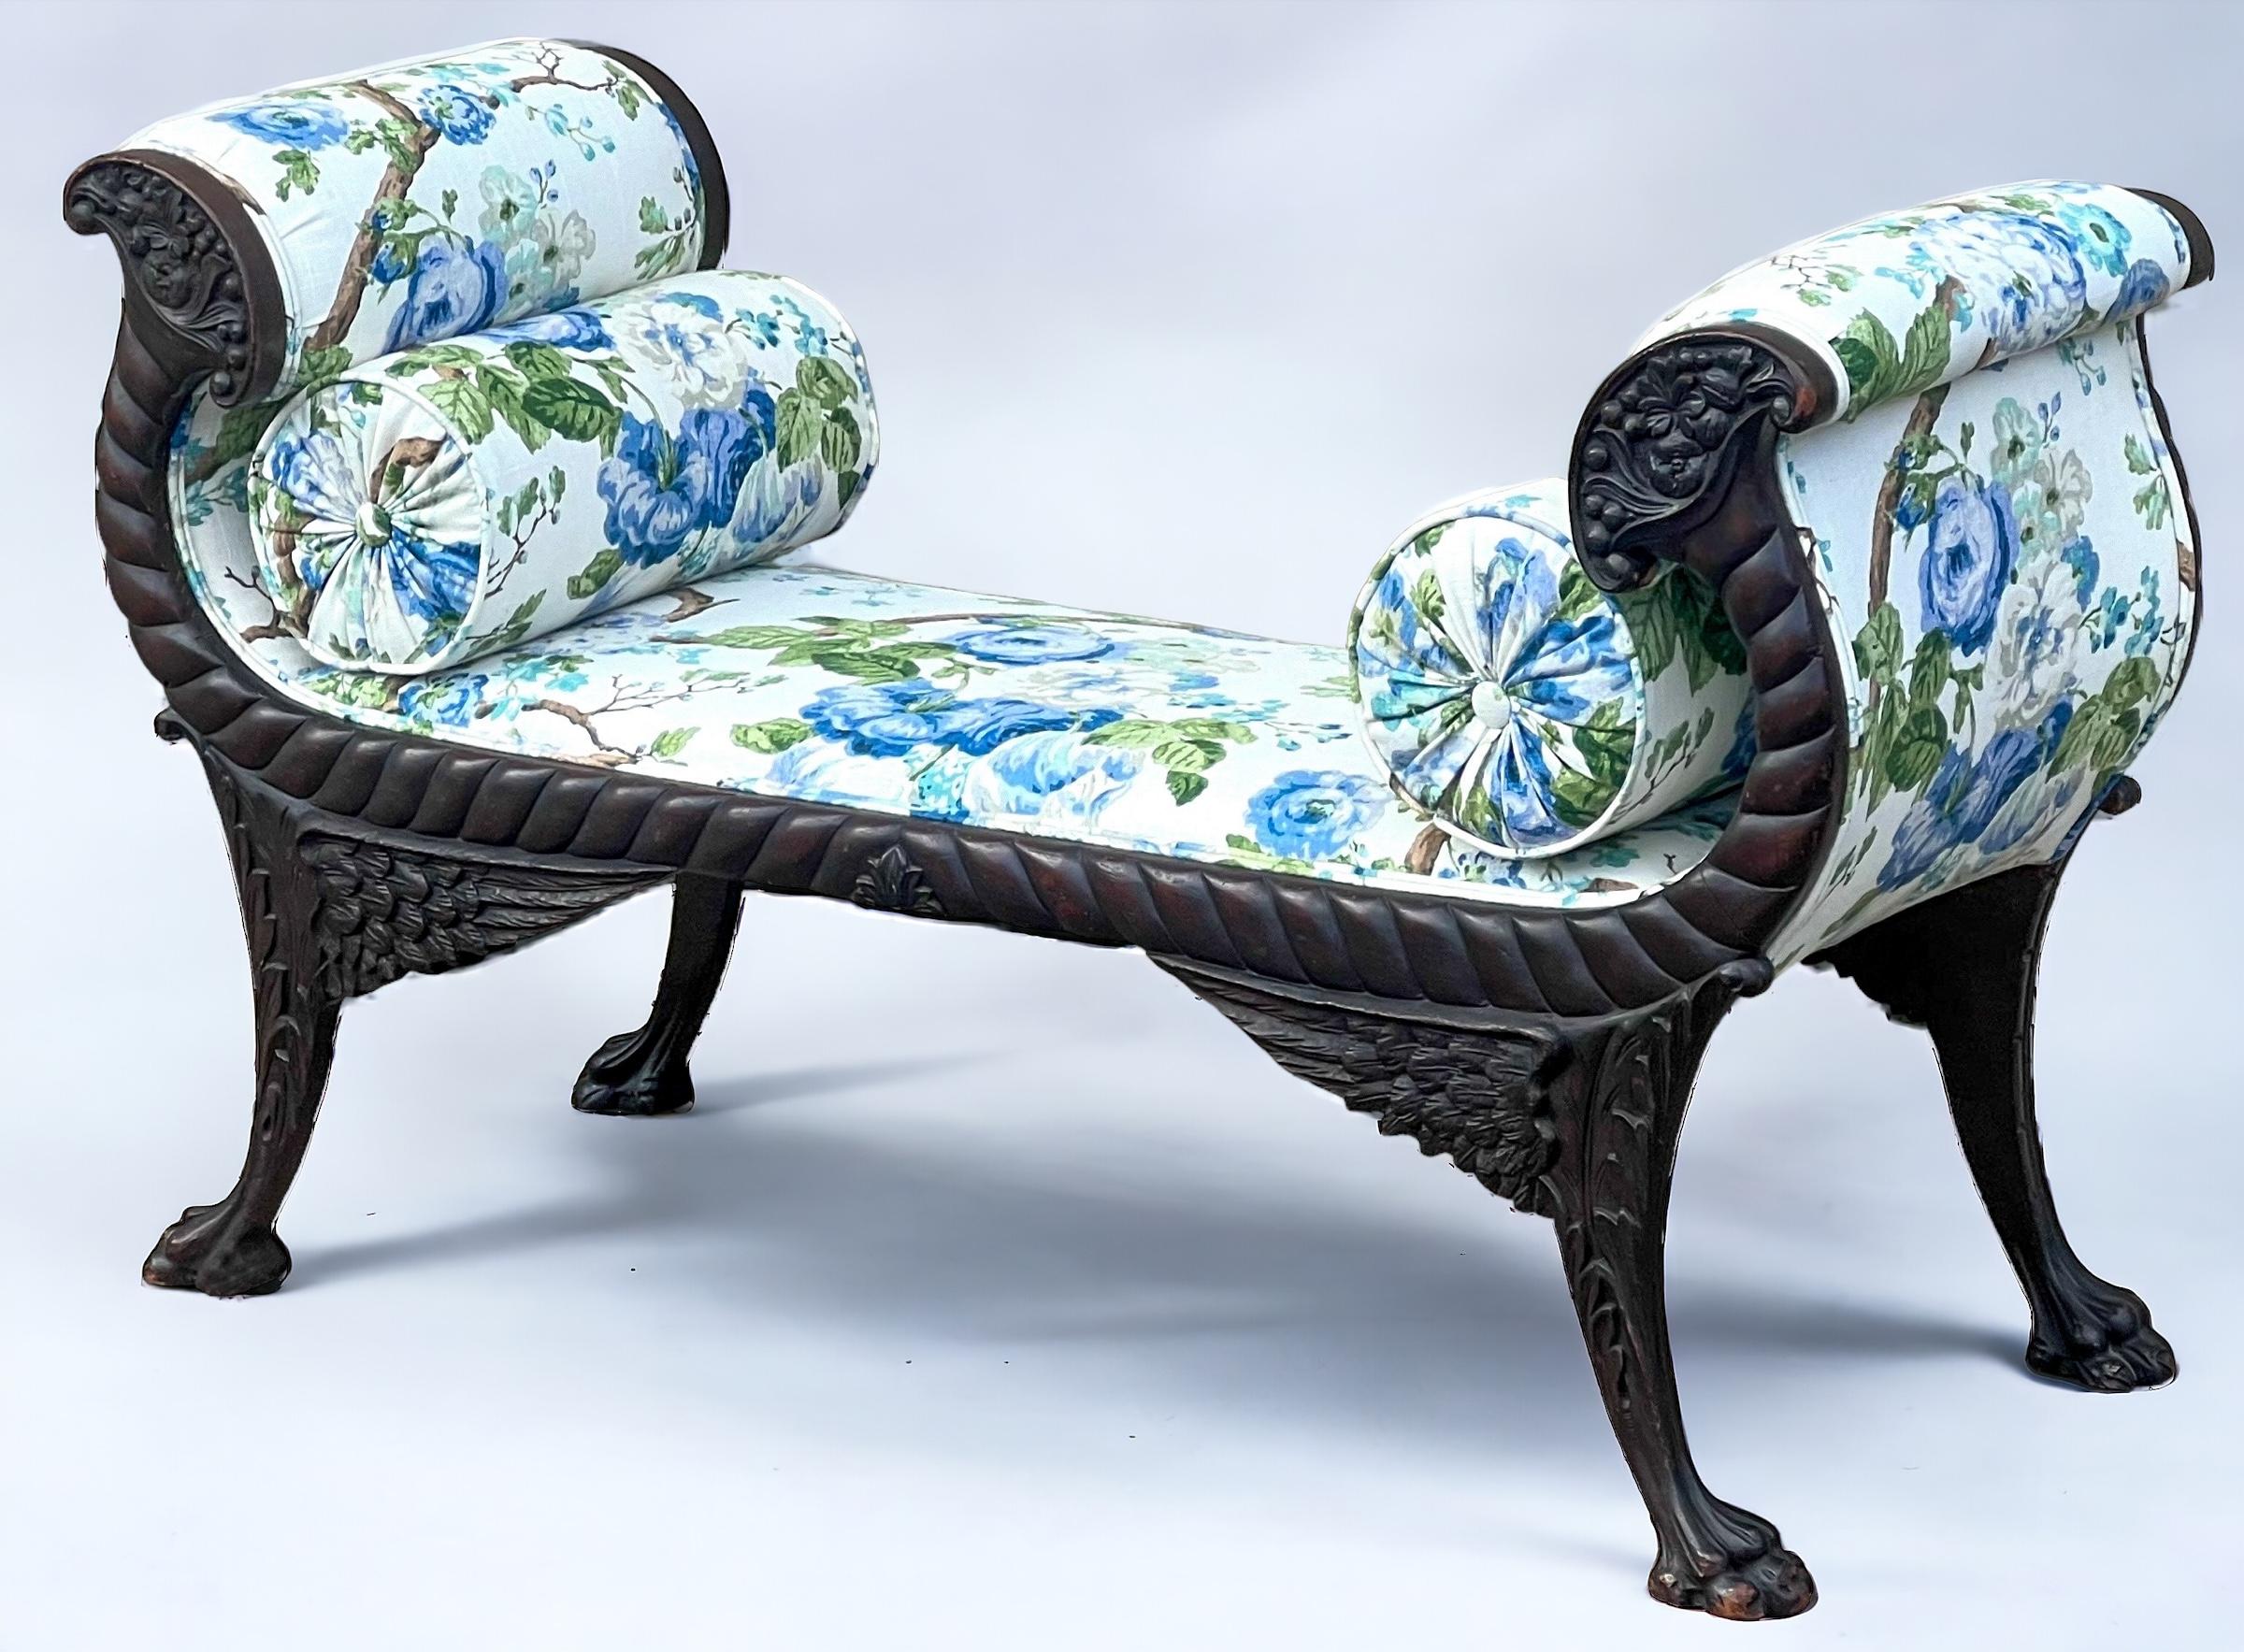 Antique American Empire Carved Mahogany Bench W/ Blue & White Floral Upholstery  For Sale 2